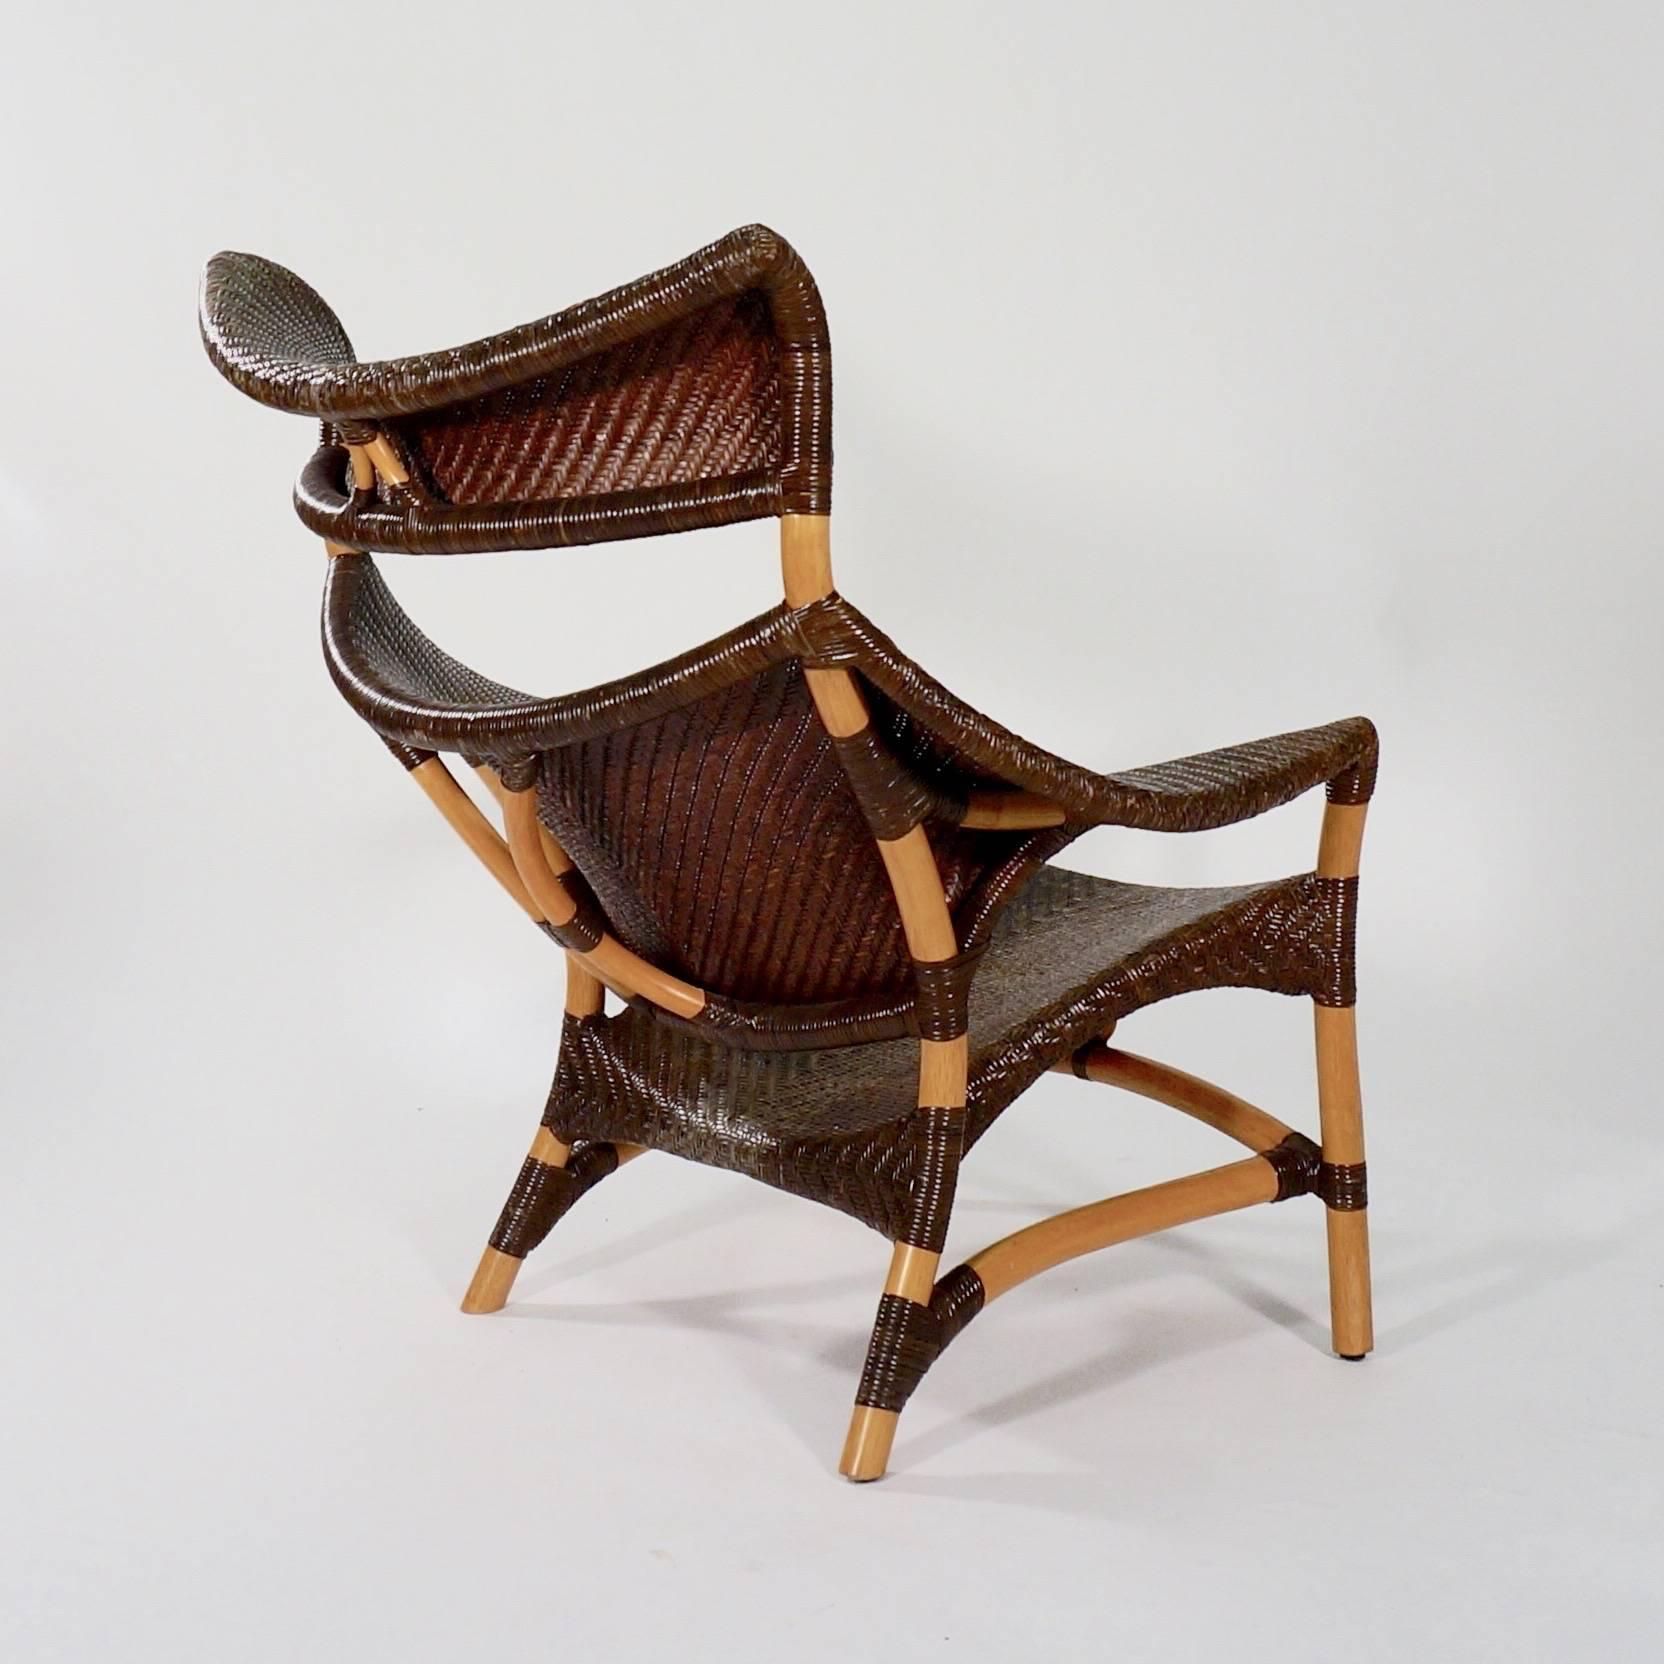 Lacquered Pair of CL-261 Woven Rattan Chairs by Yuzru Yamakawa